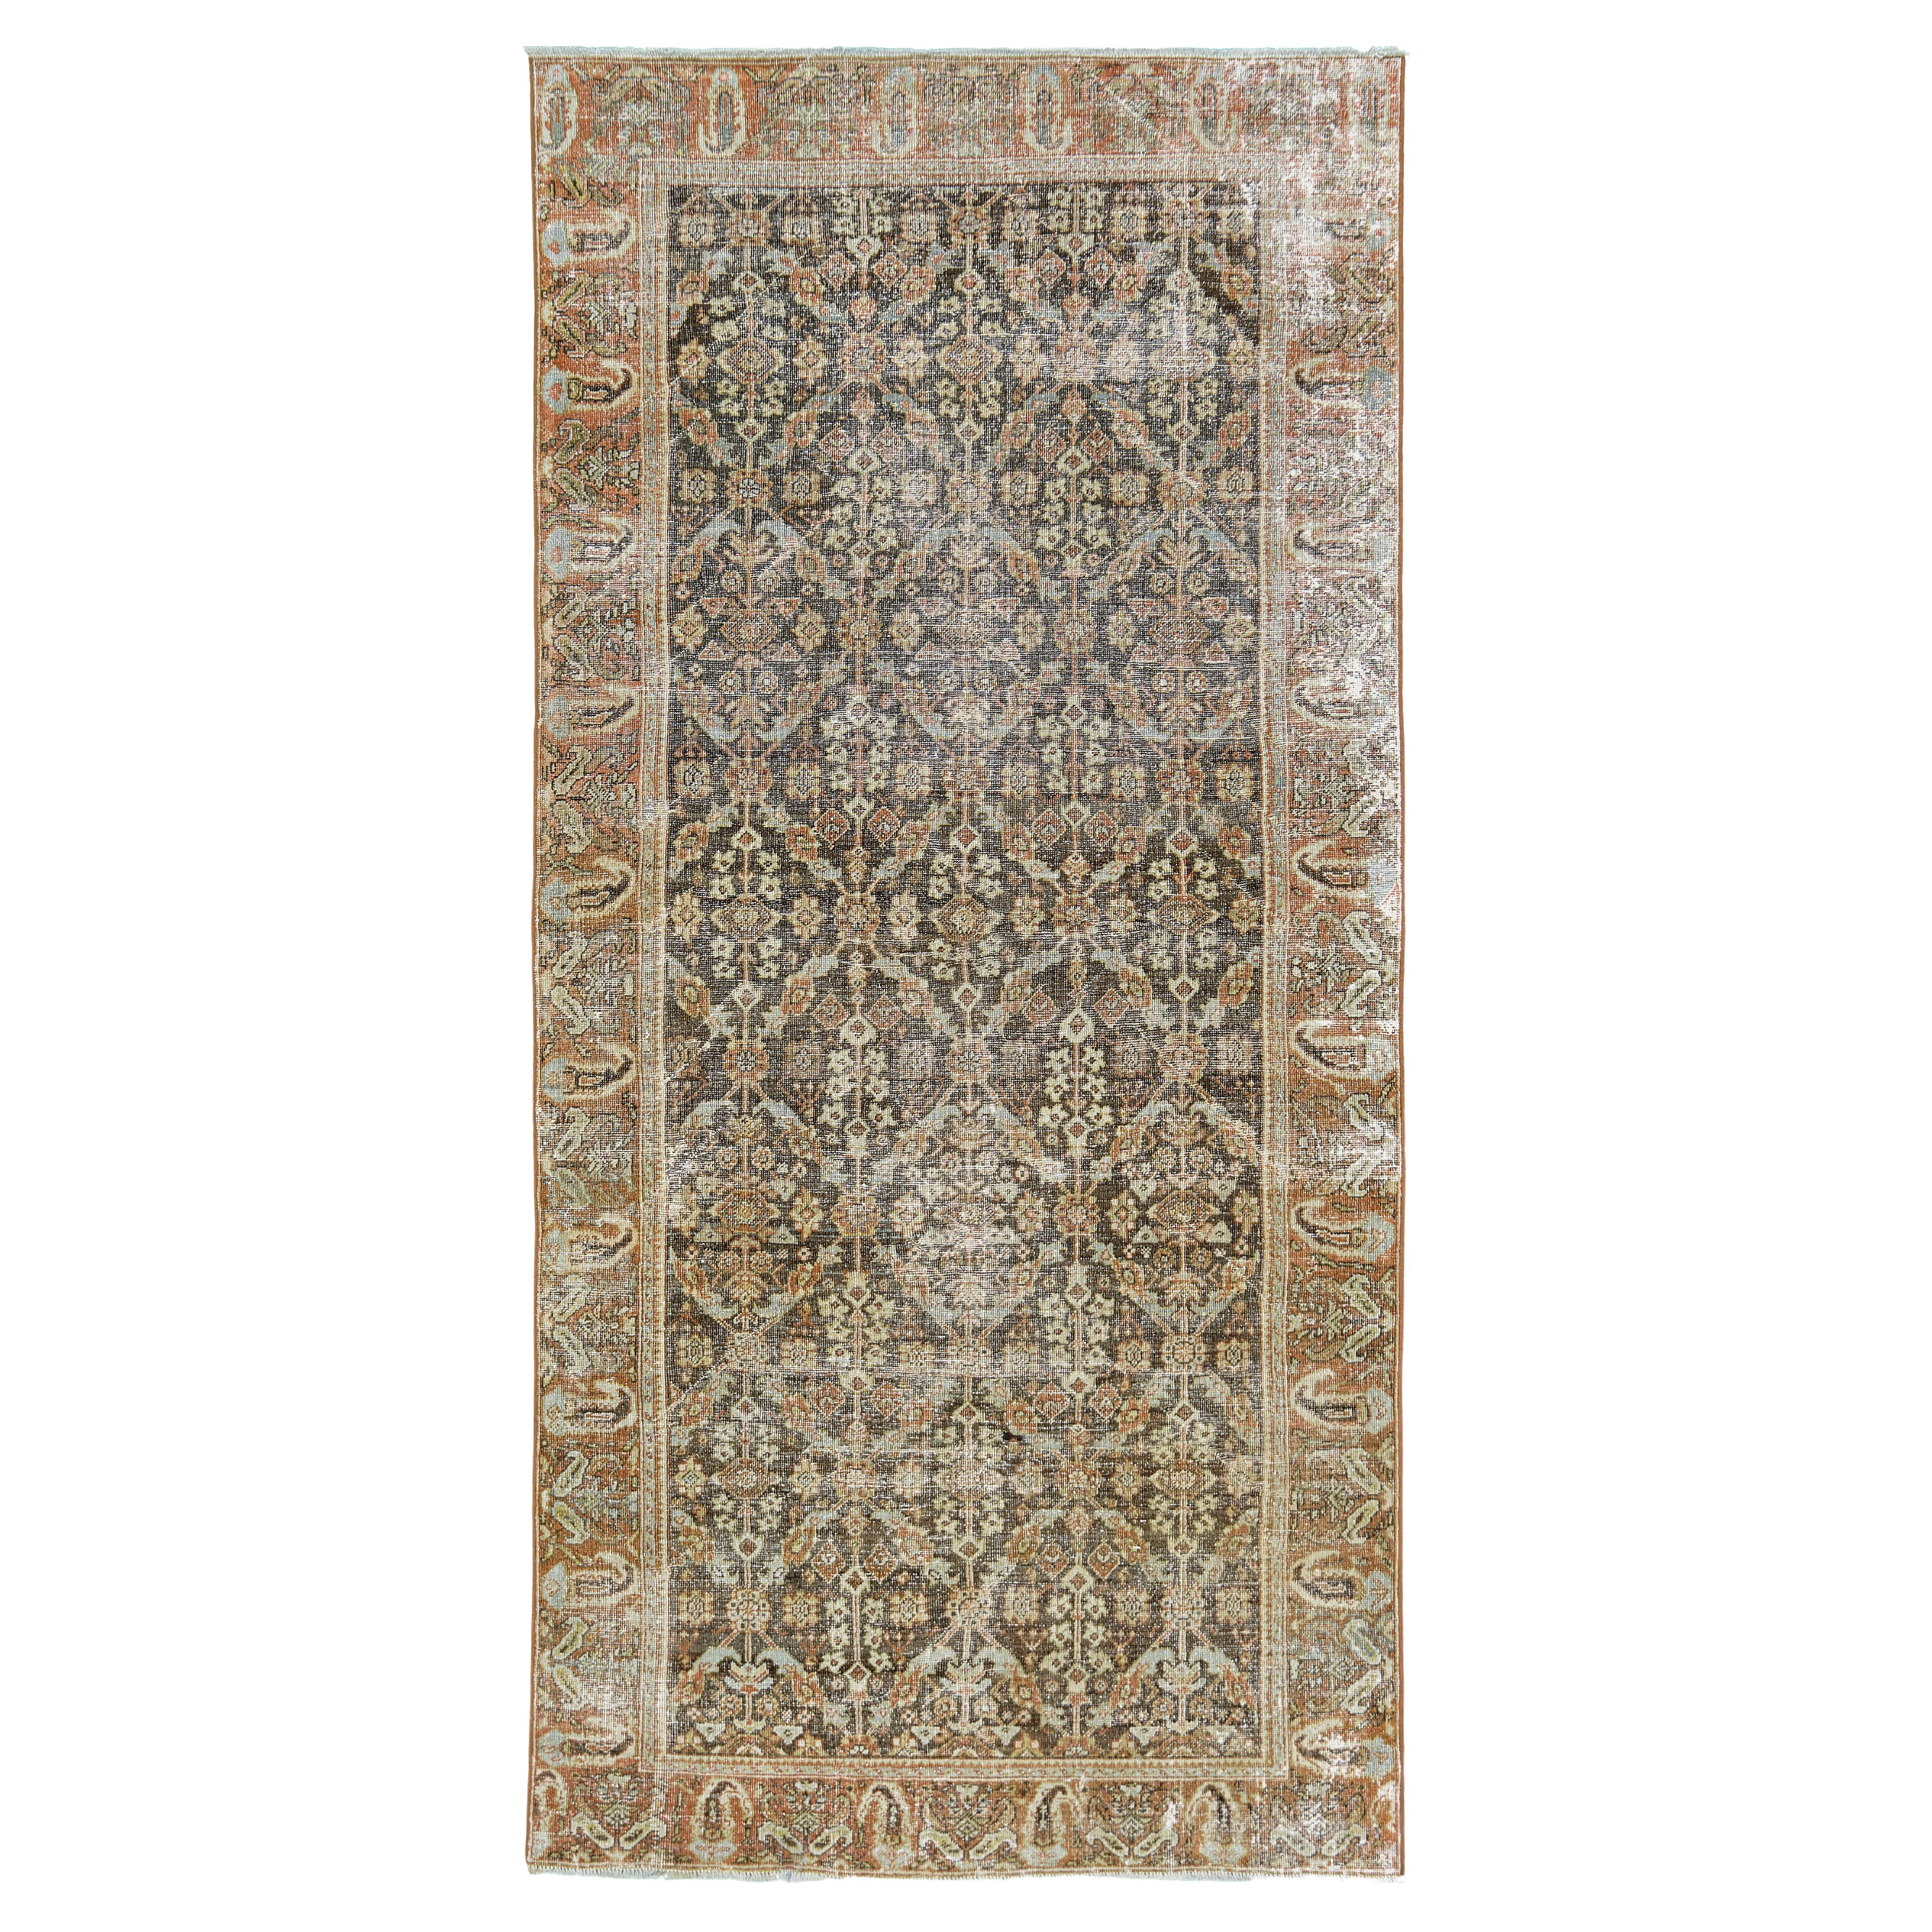 Antique Persian Malayer Runner by Mehraban Rugs